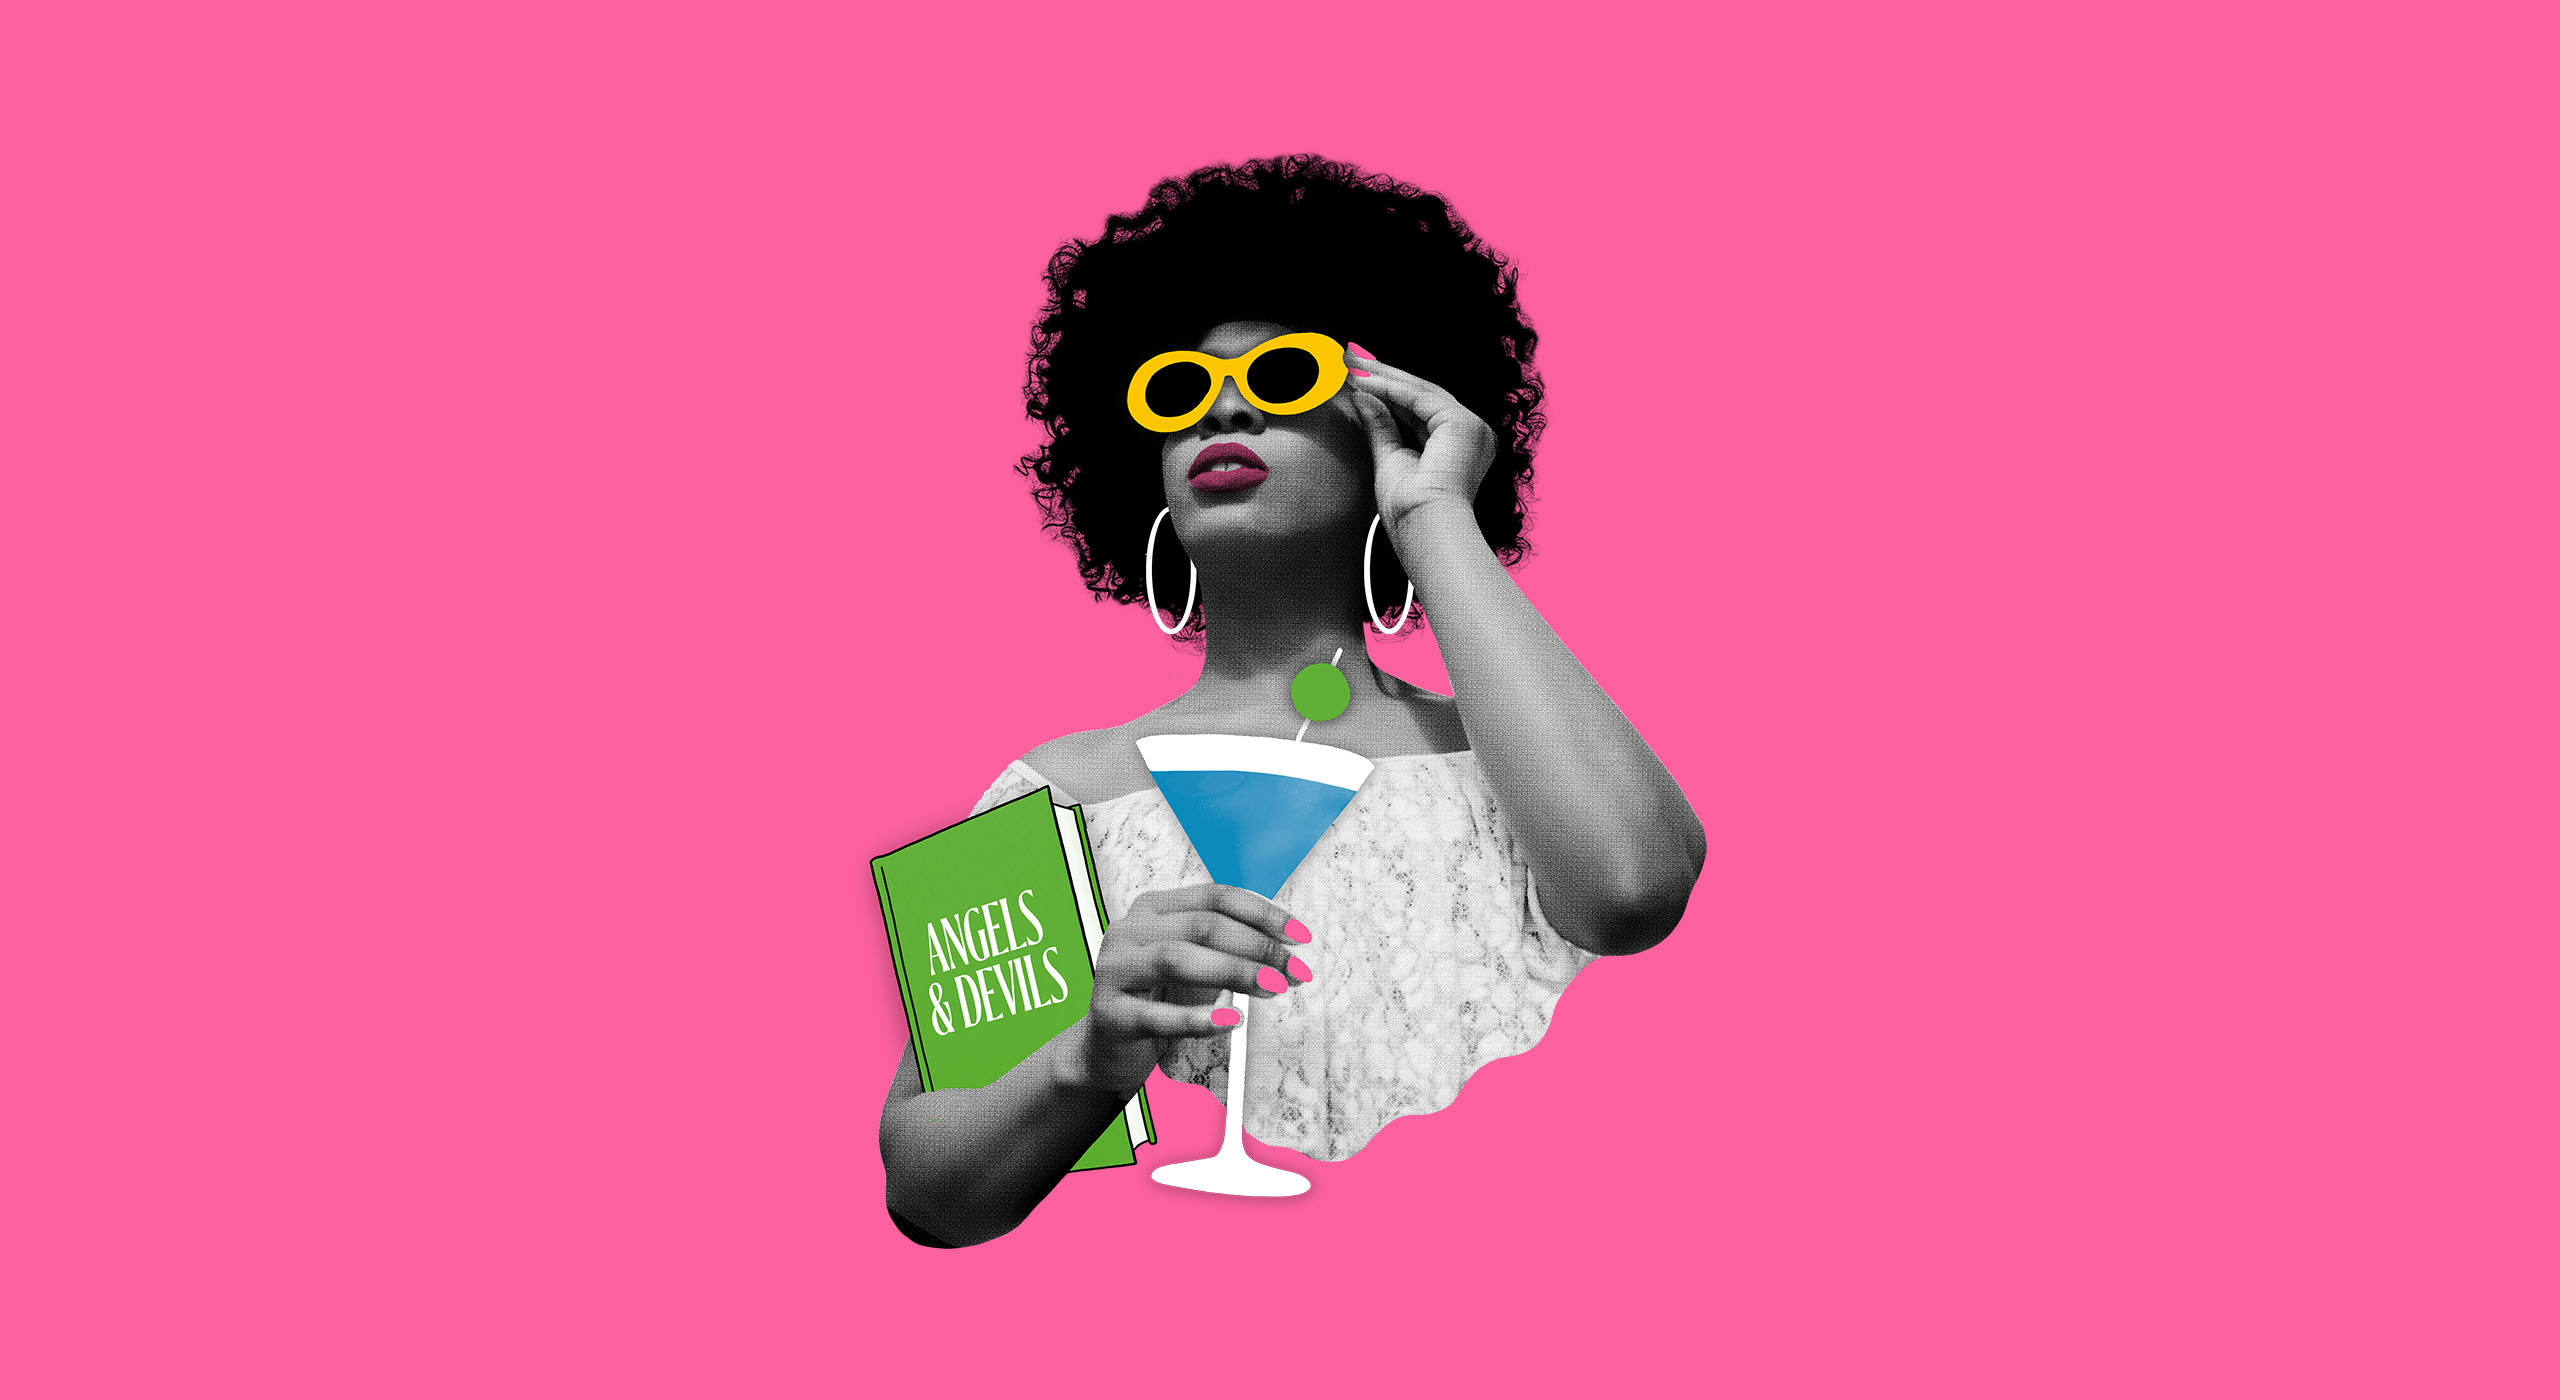 A collage of a black women with curly black hair hair looking stylish with yellow sunglasses, large hoop earring and a martini.